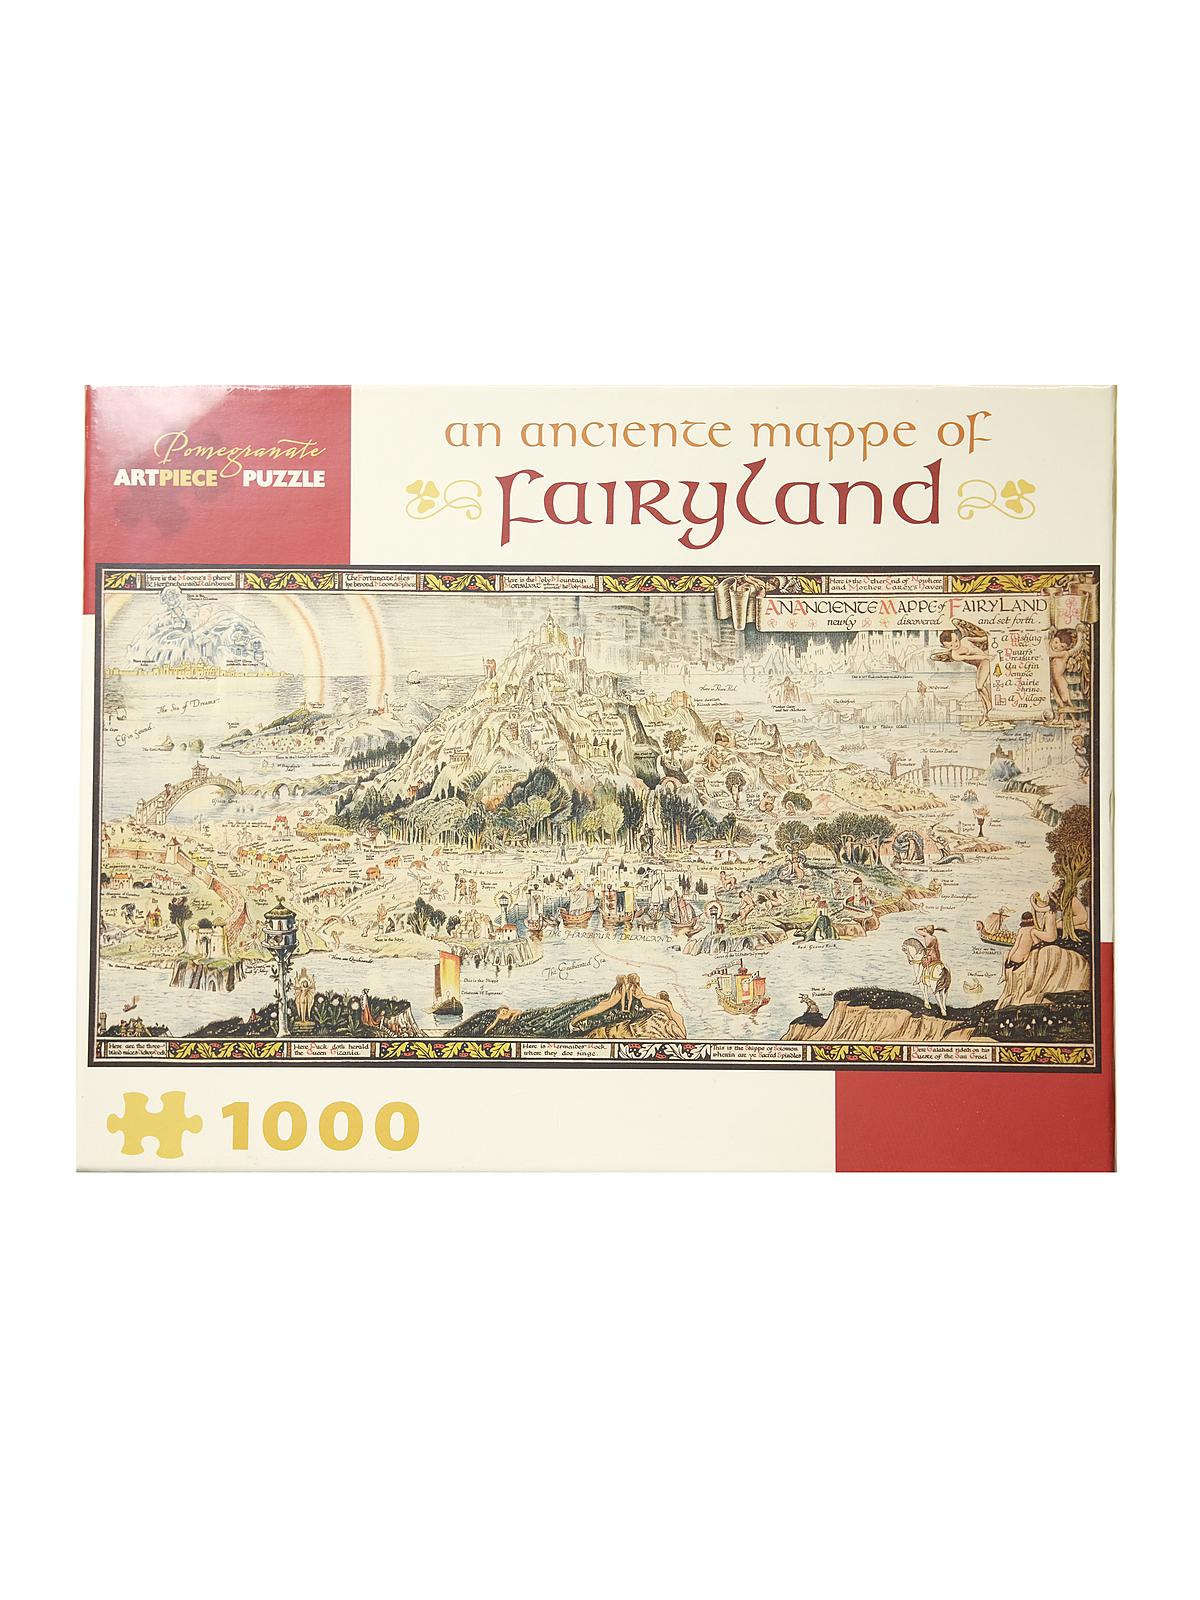 1000-piece Jigsaw Puzzles An Ancient Mappe Of Fairyland